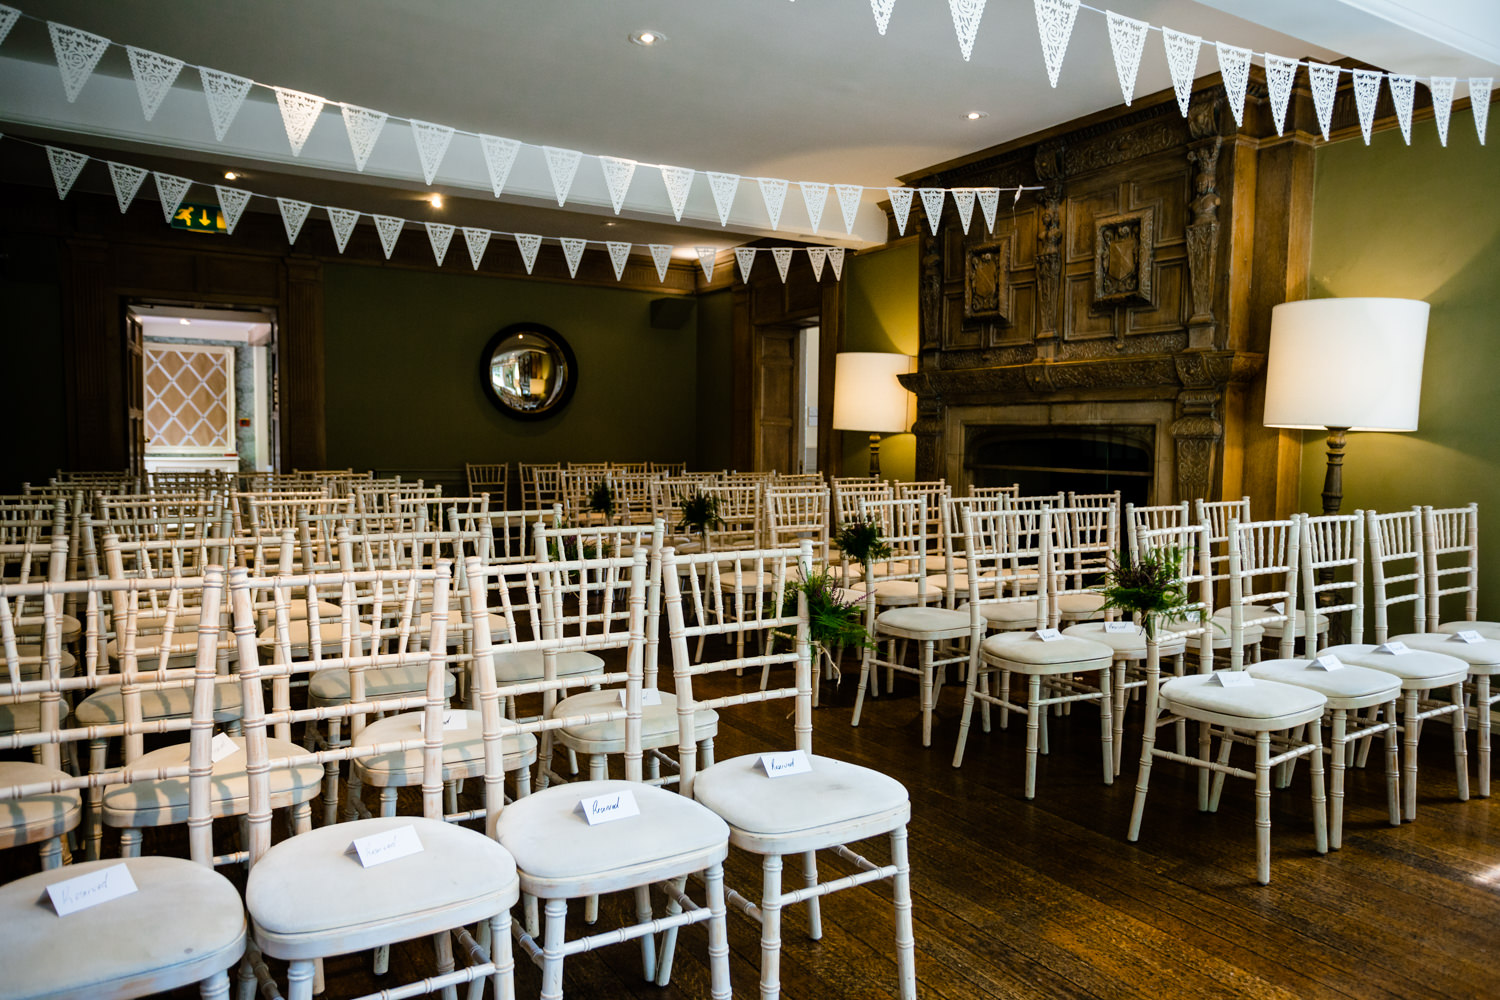 The beautiful ceremony room at Whirlowbrook Hall in Sheffield.